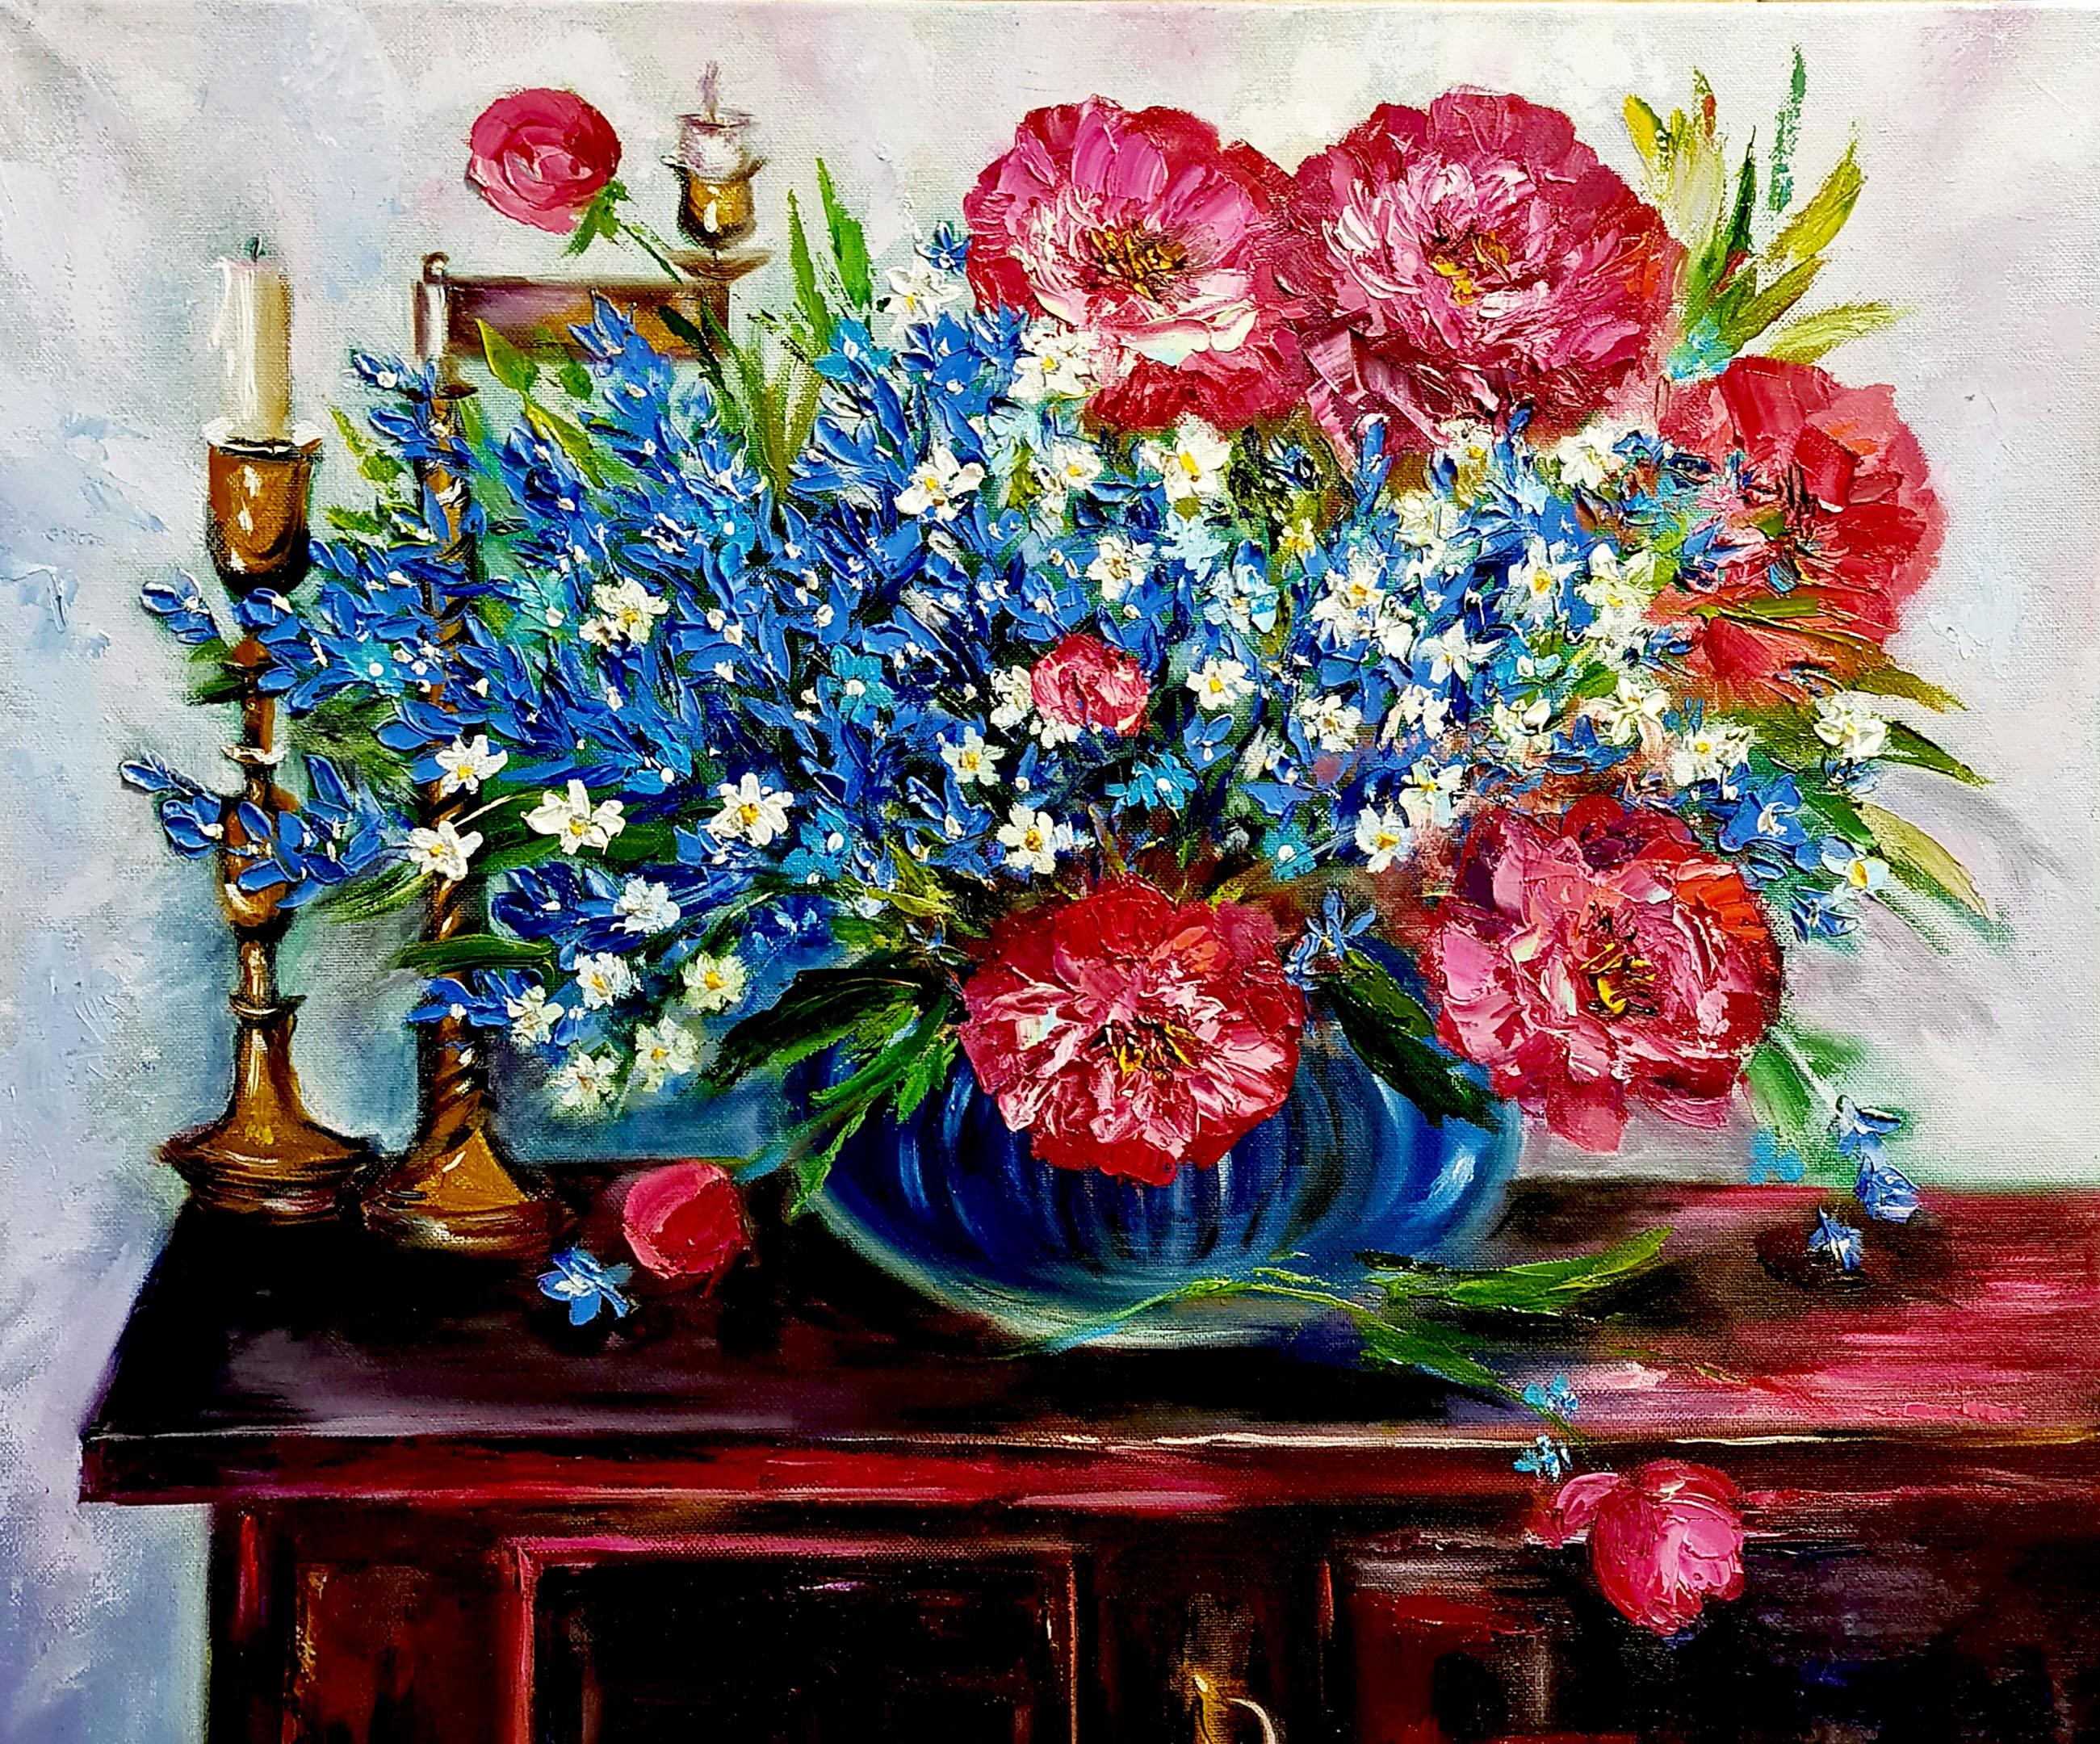 Lilya Volskaya Landscape Painting - Burgundy peonies, blue flowers in a vase.Candles and antique table.